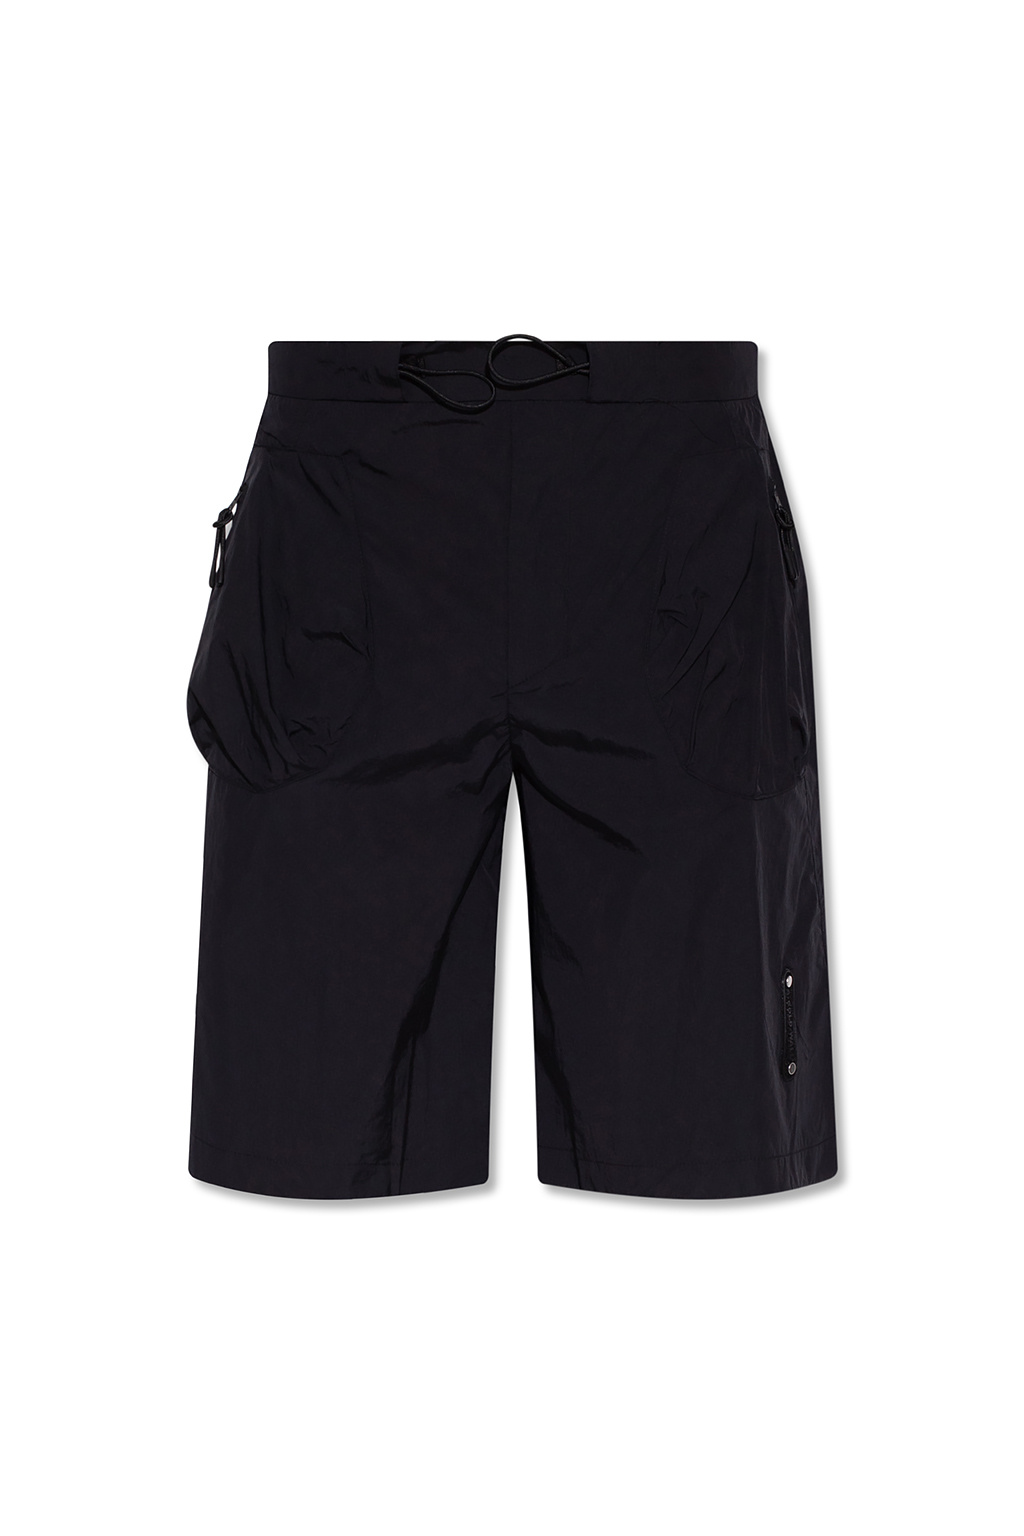 A-COLD-WALL* Shorts with logo | Men's Clothing | Vitkac